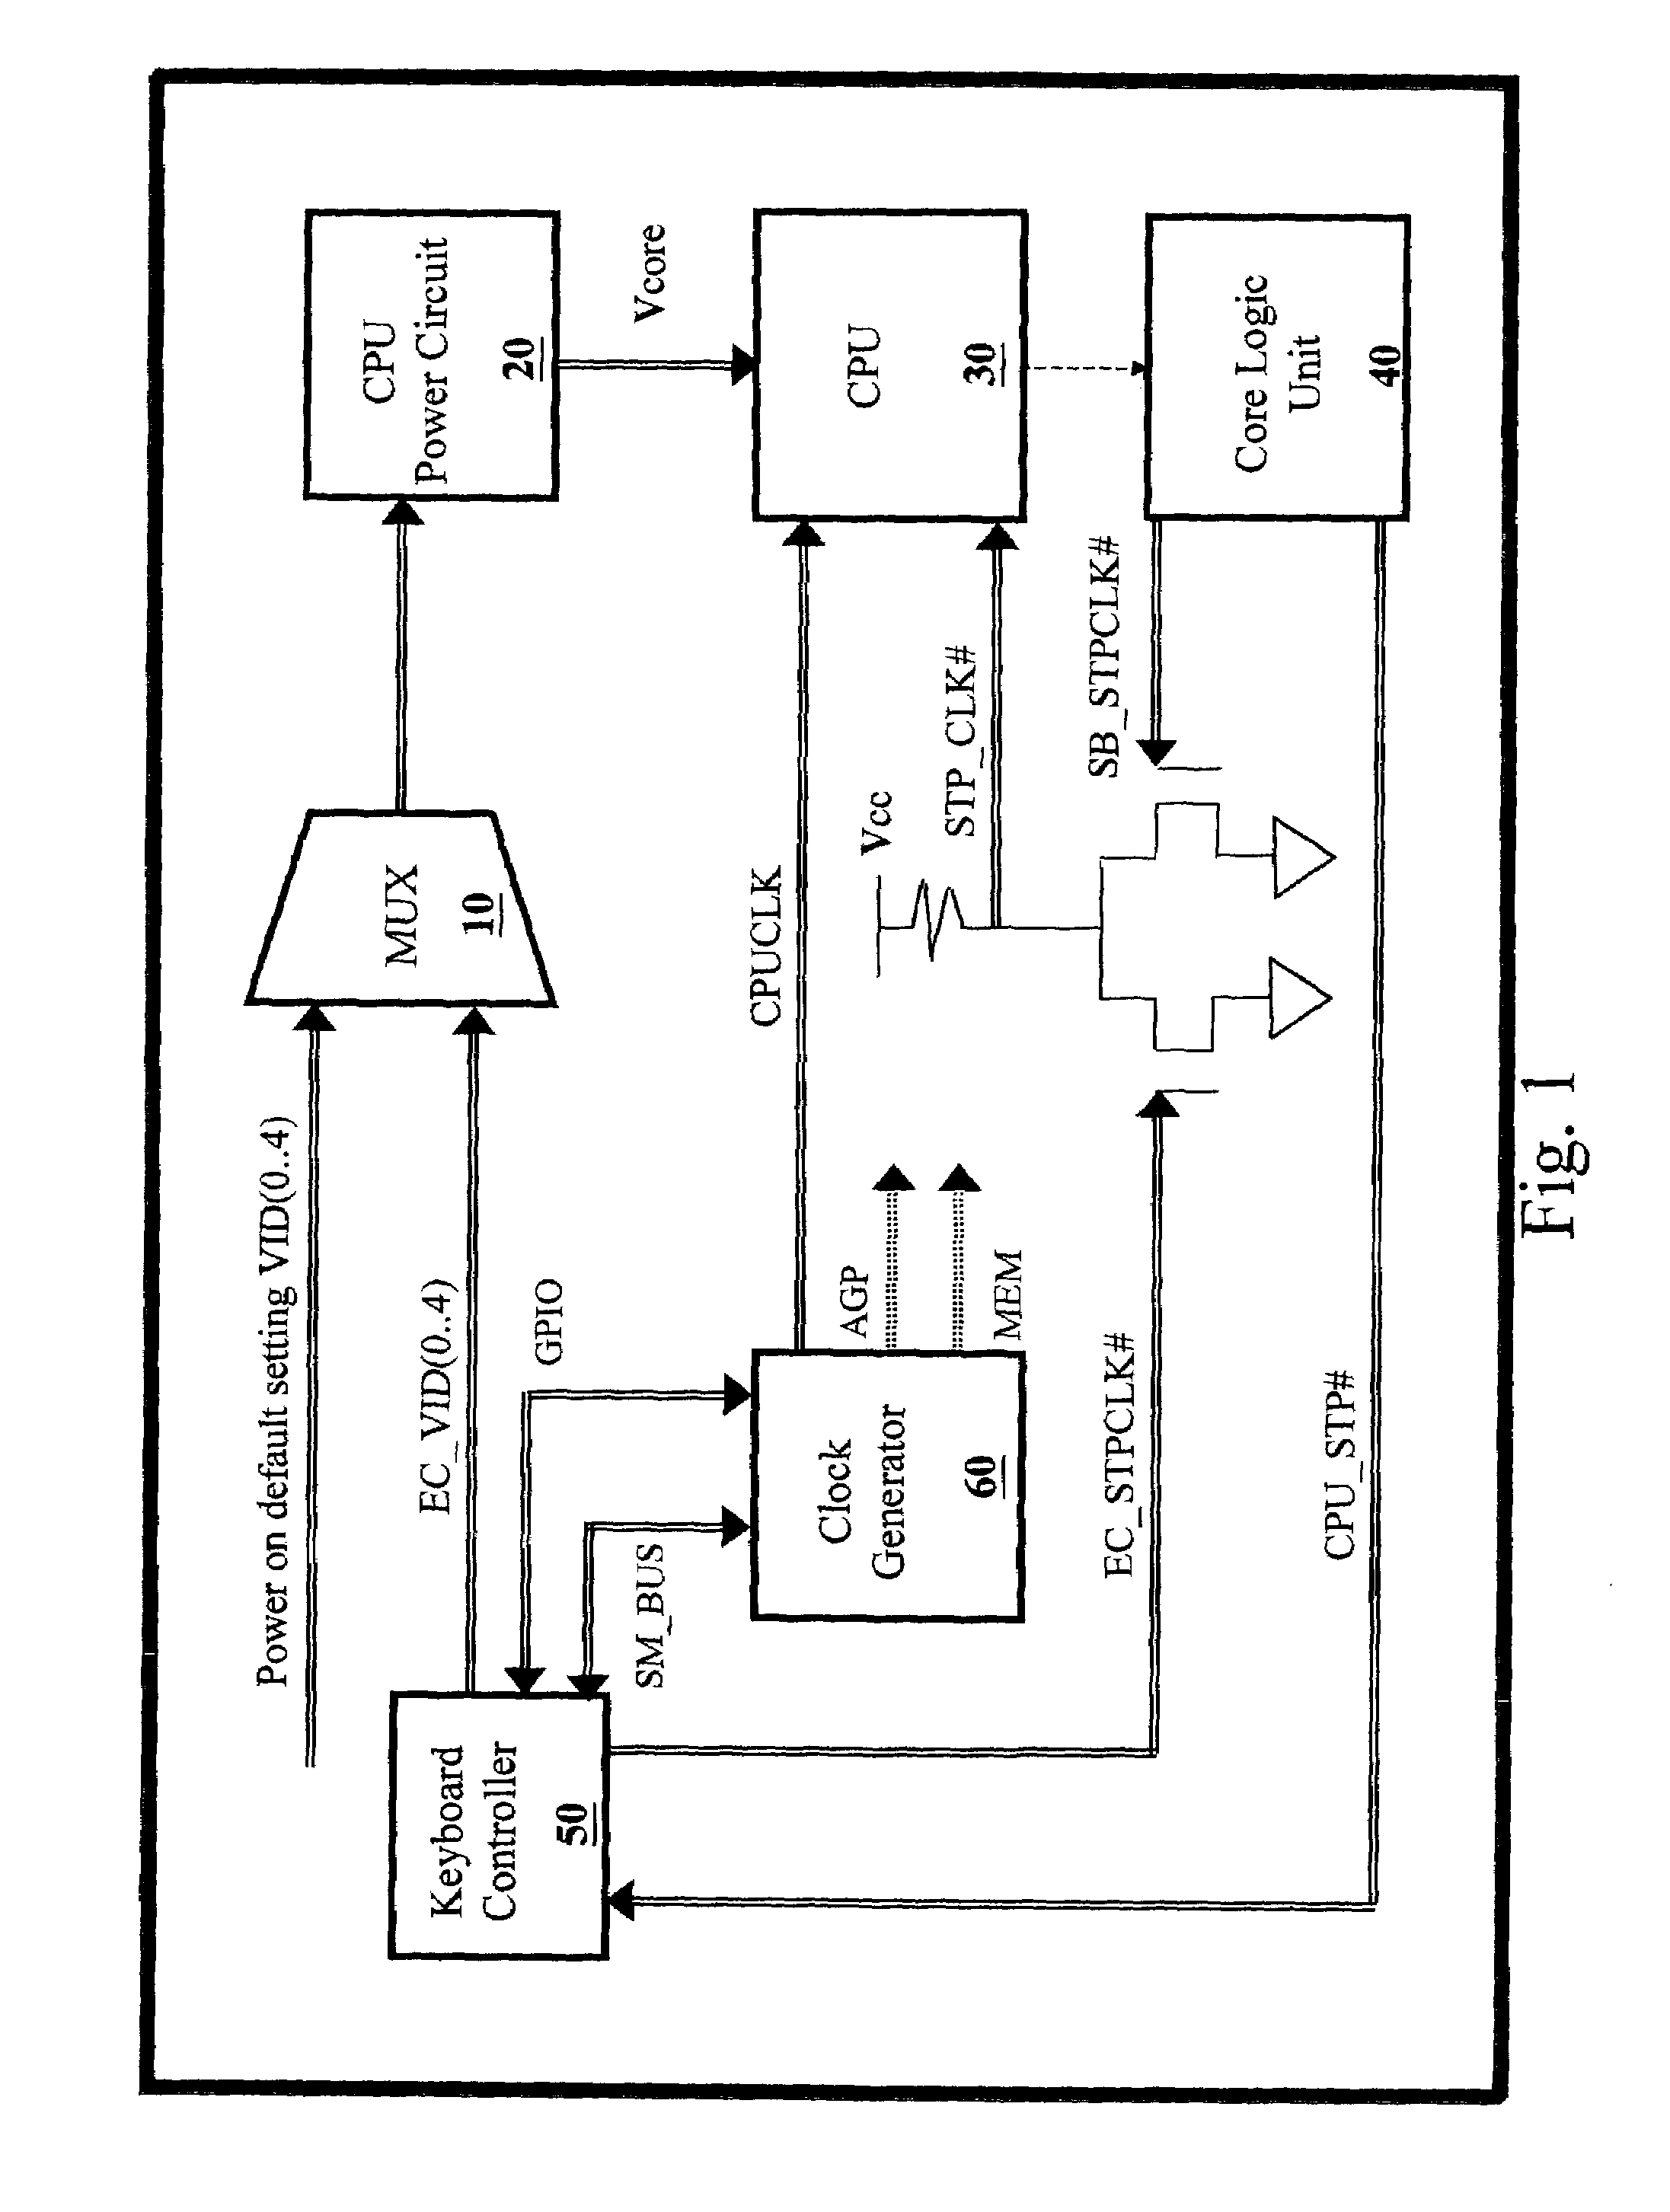 Method of portable computer power management using keyboard controller in detection circuit